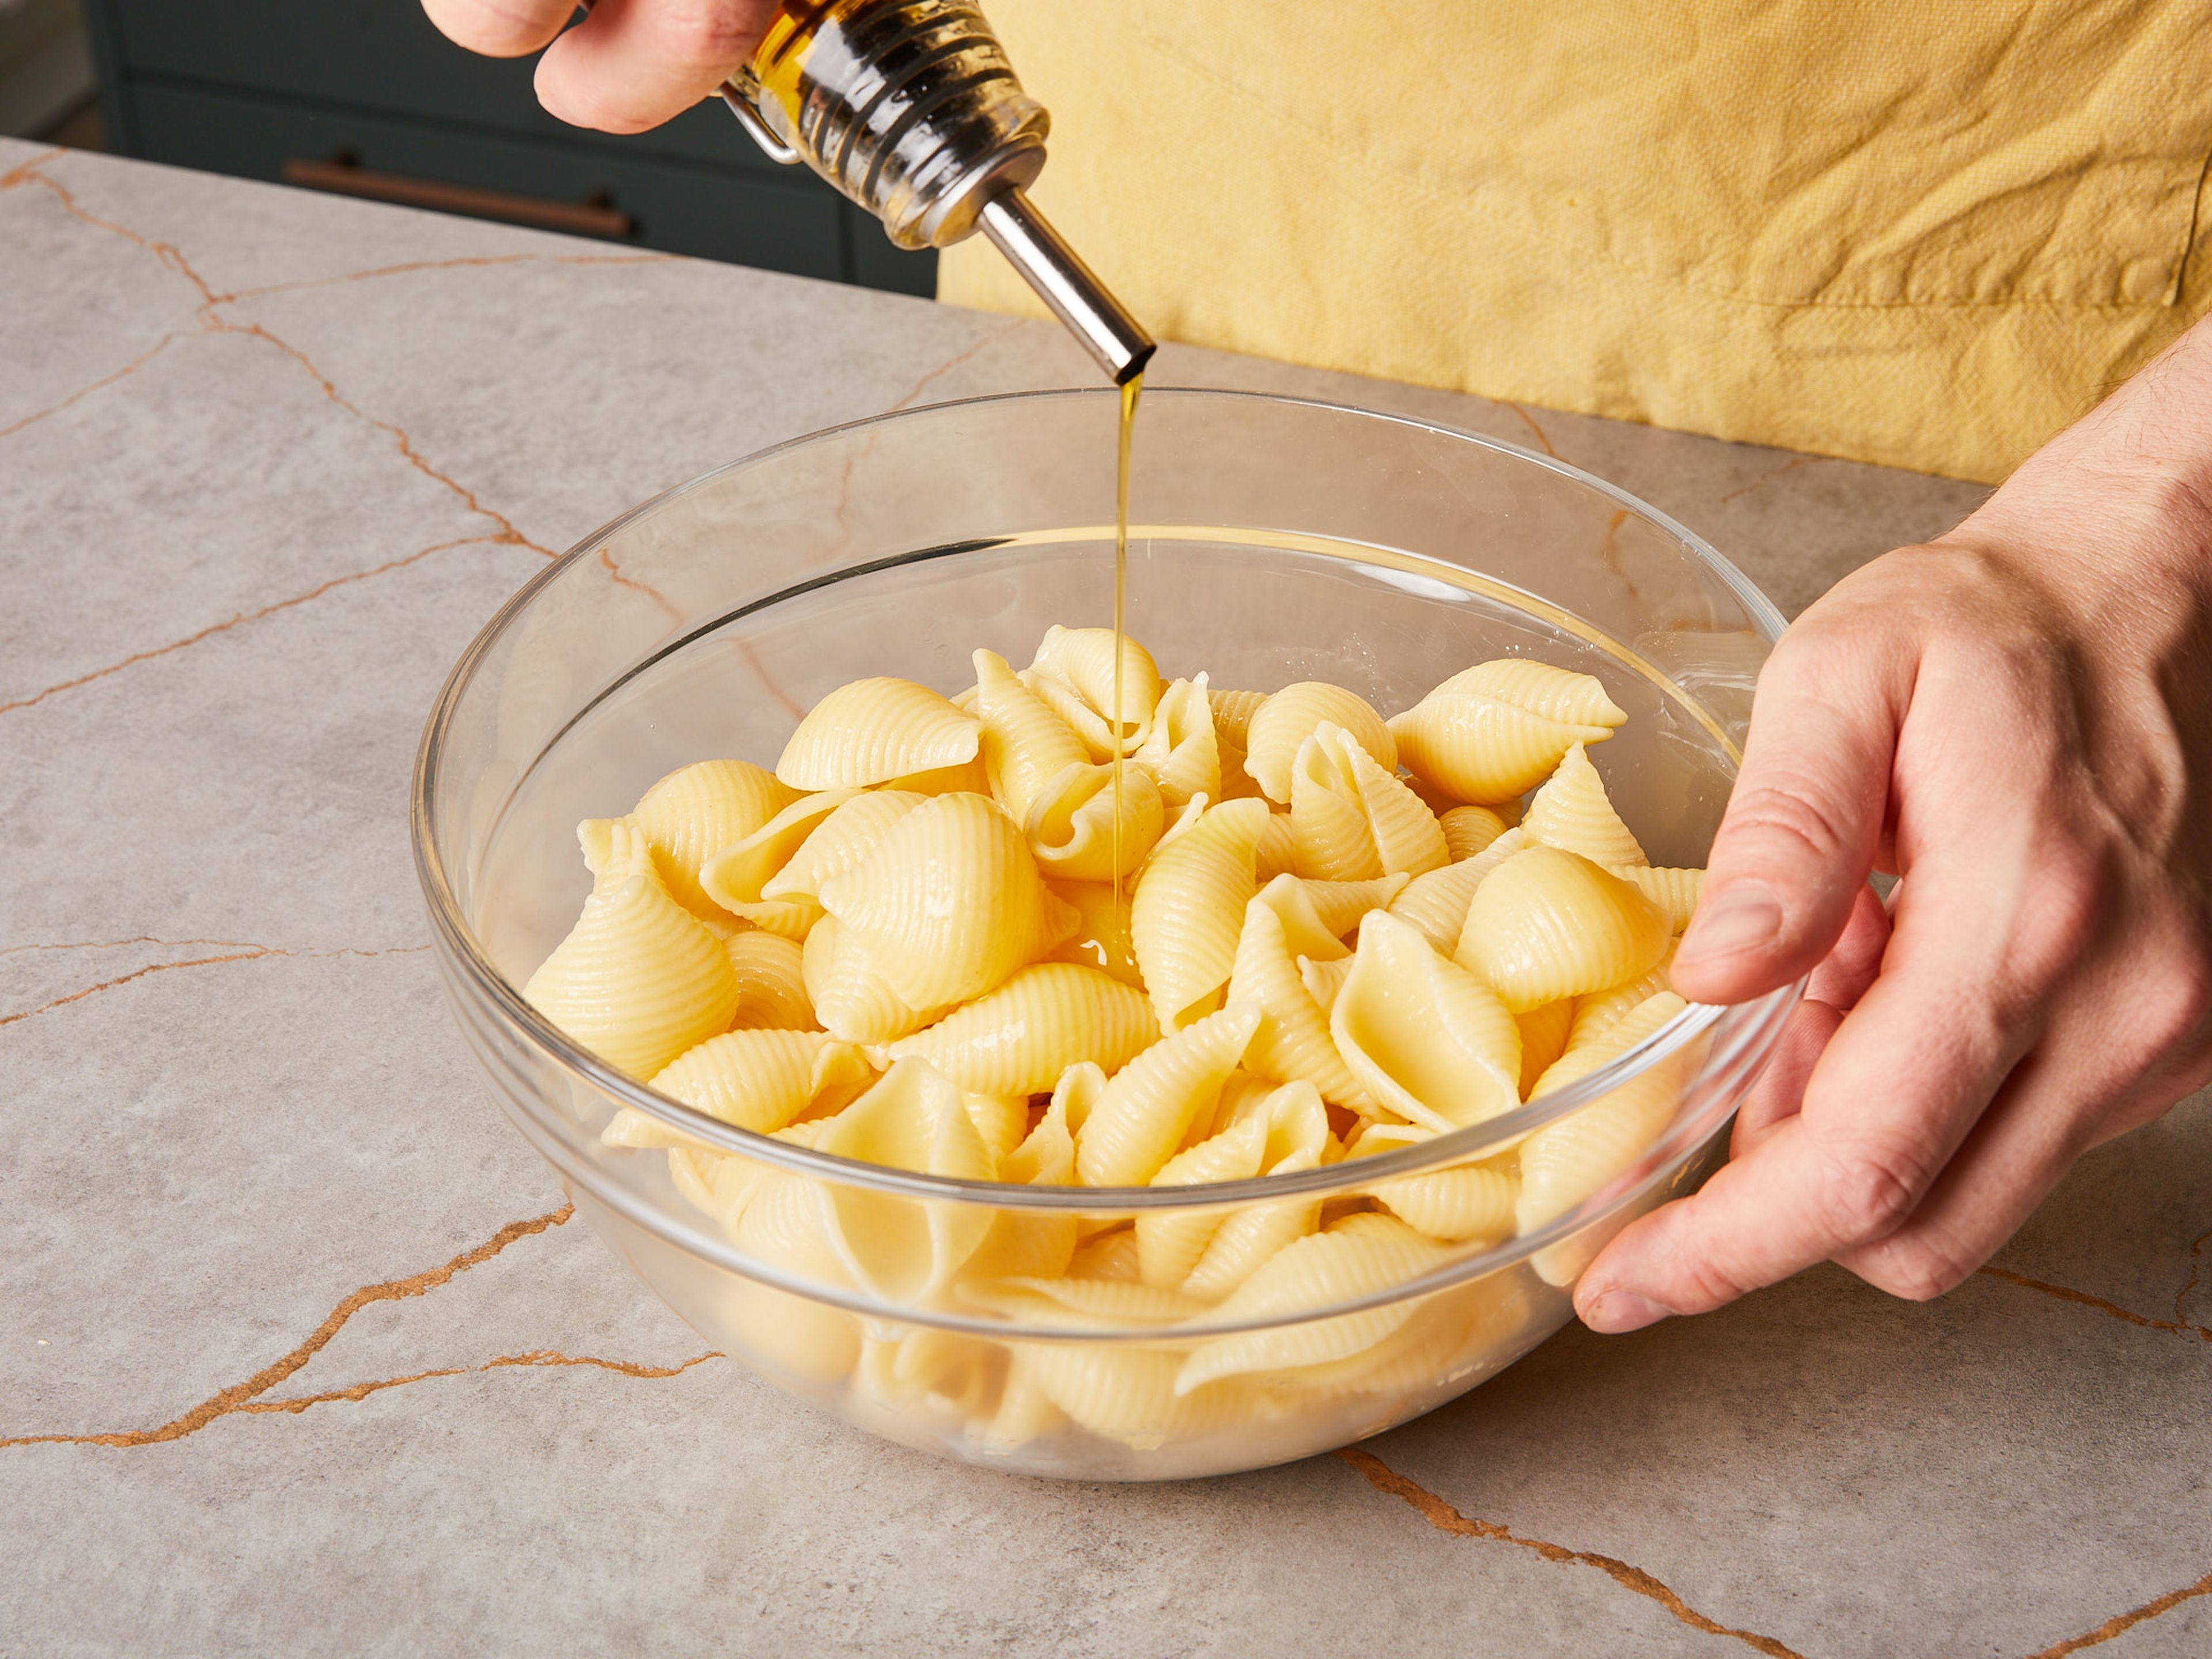 Bring a large pot of generously salted water to a boil. Add pasta and cook according to package directions. At the end of the cooking time, drain pasta. Place pasta in a large bowl and mix with a little olive oil to prevent it sticking together. Set aside to cool.